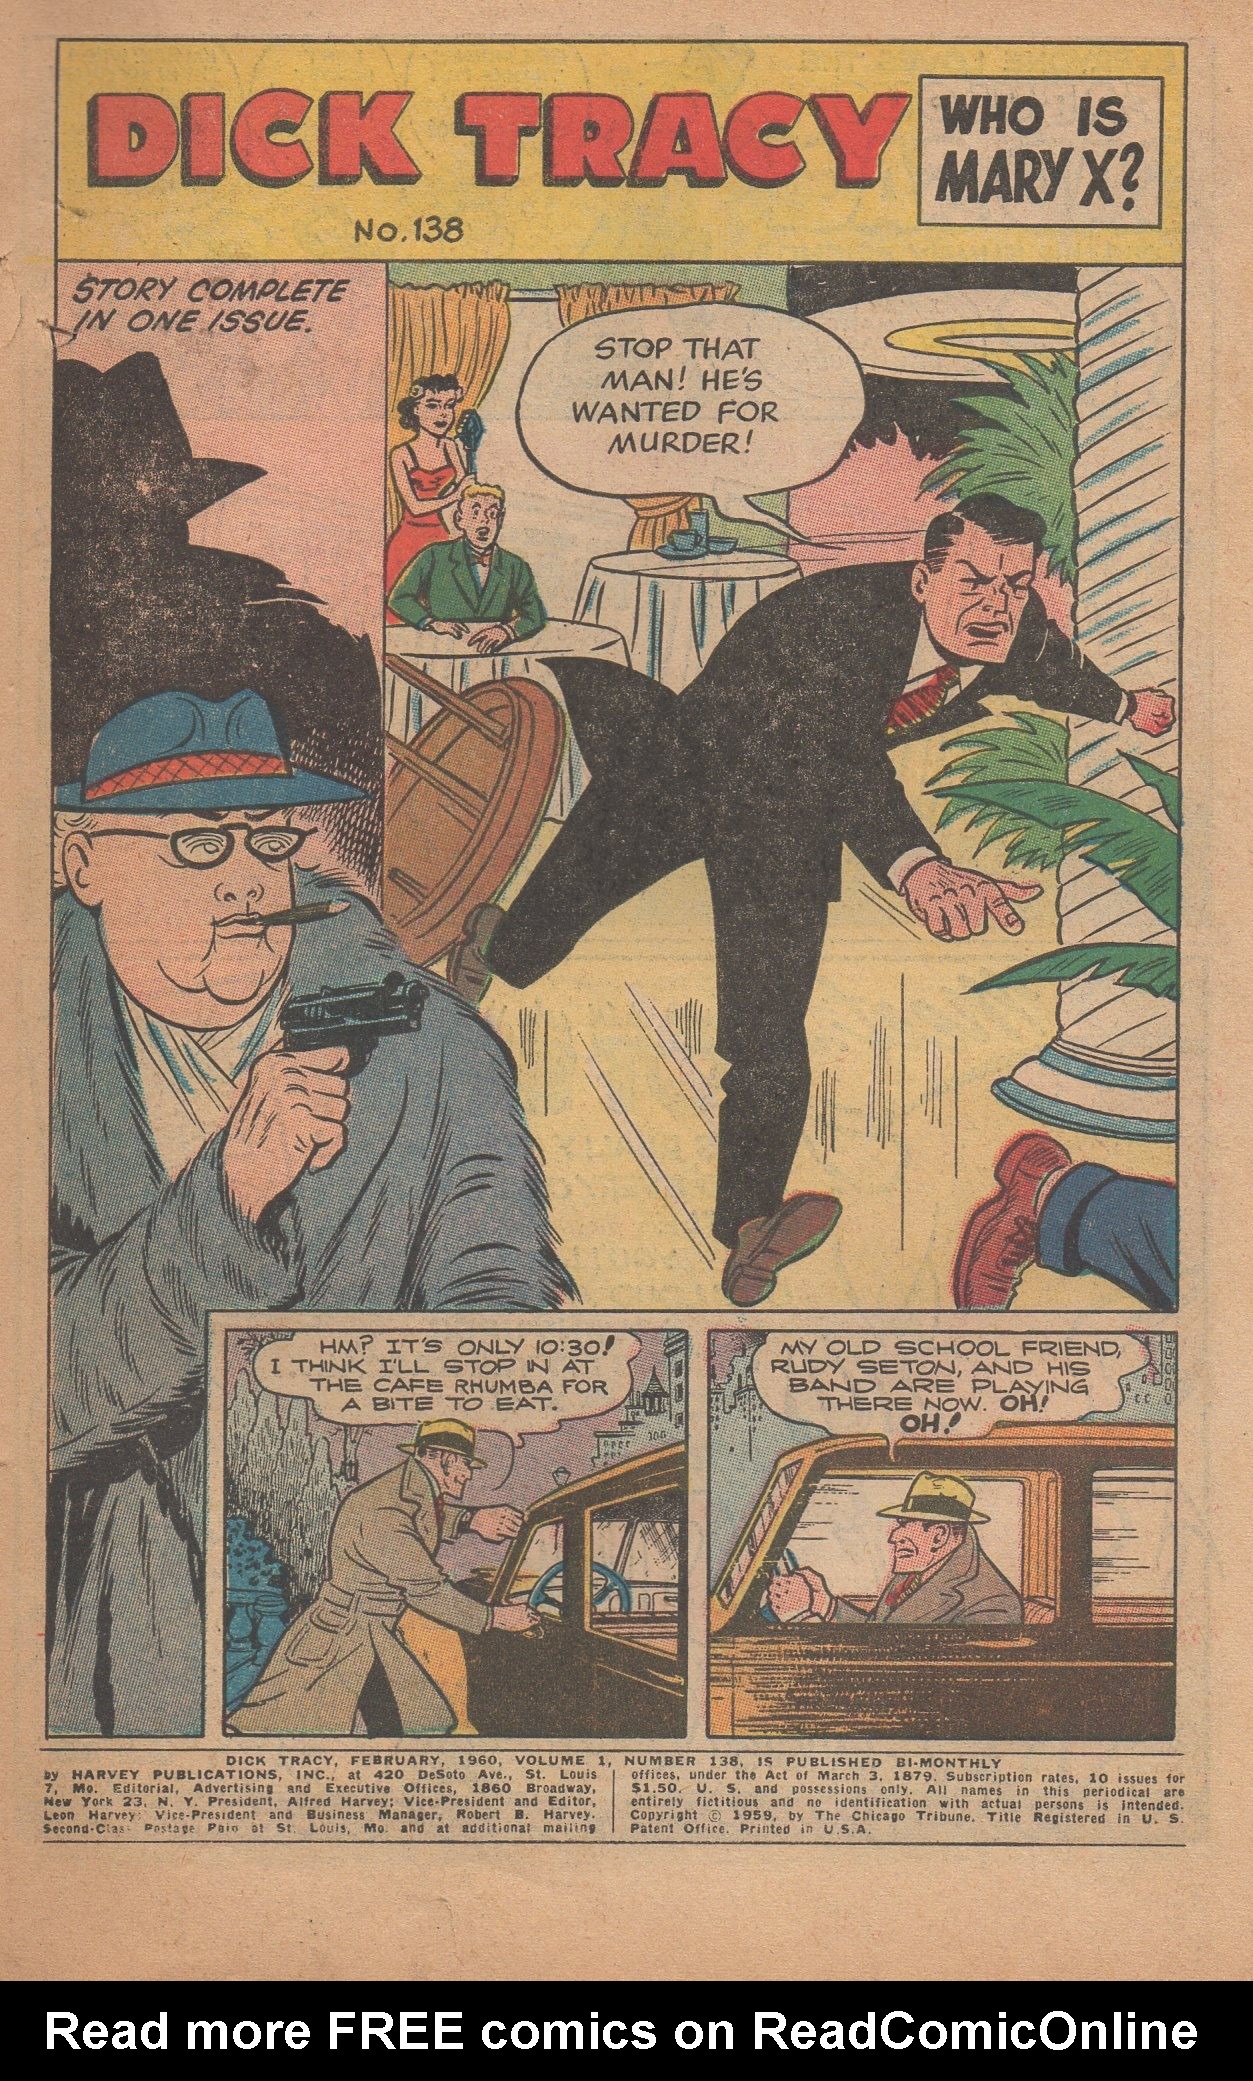 Read online Dick Tracy comic -  Issue #138 - 3